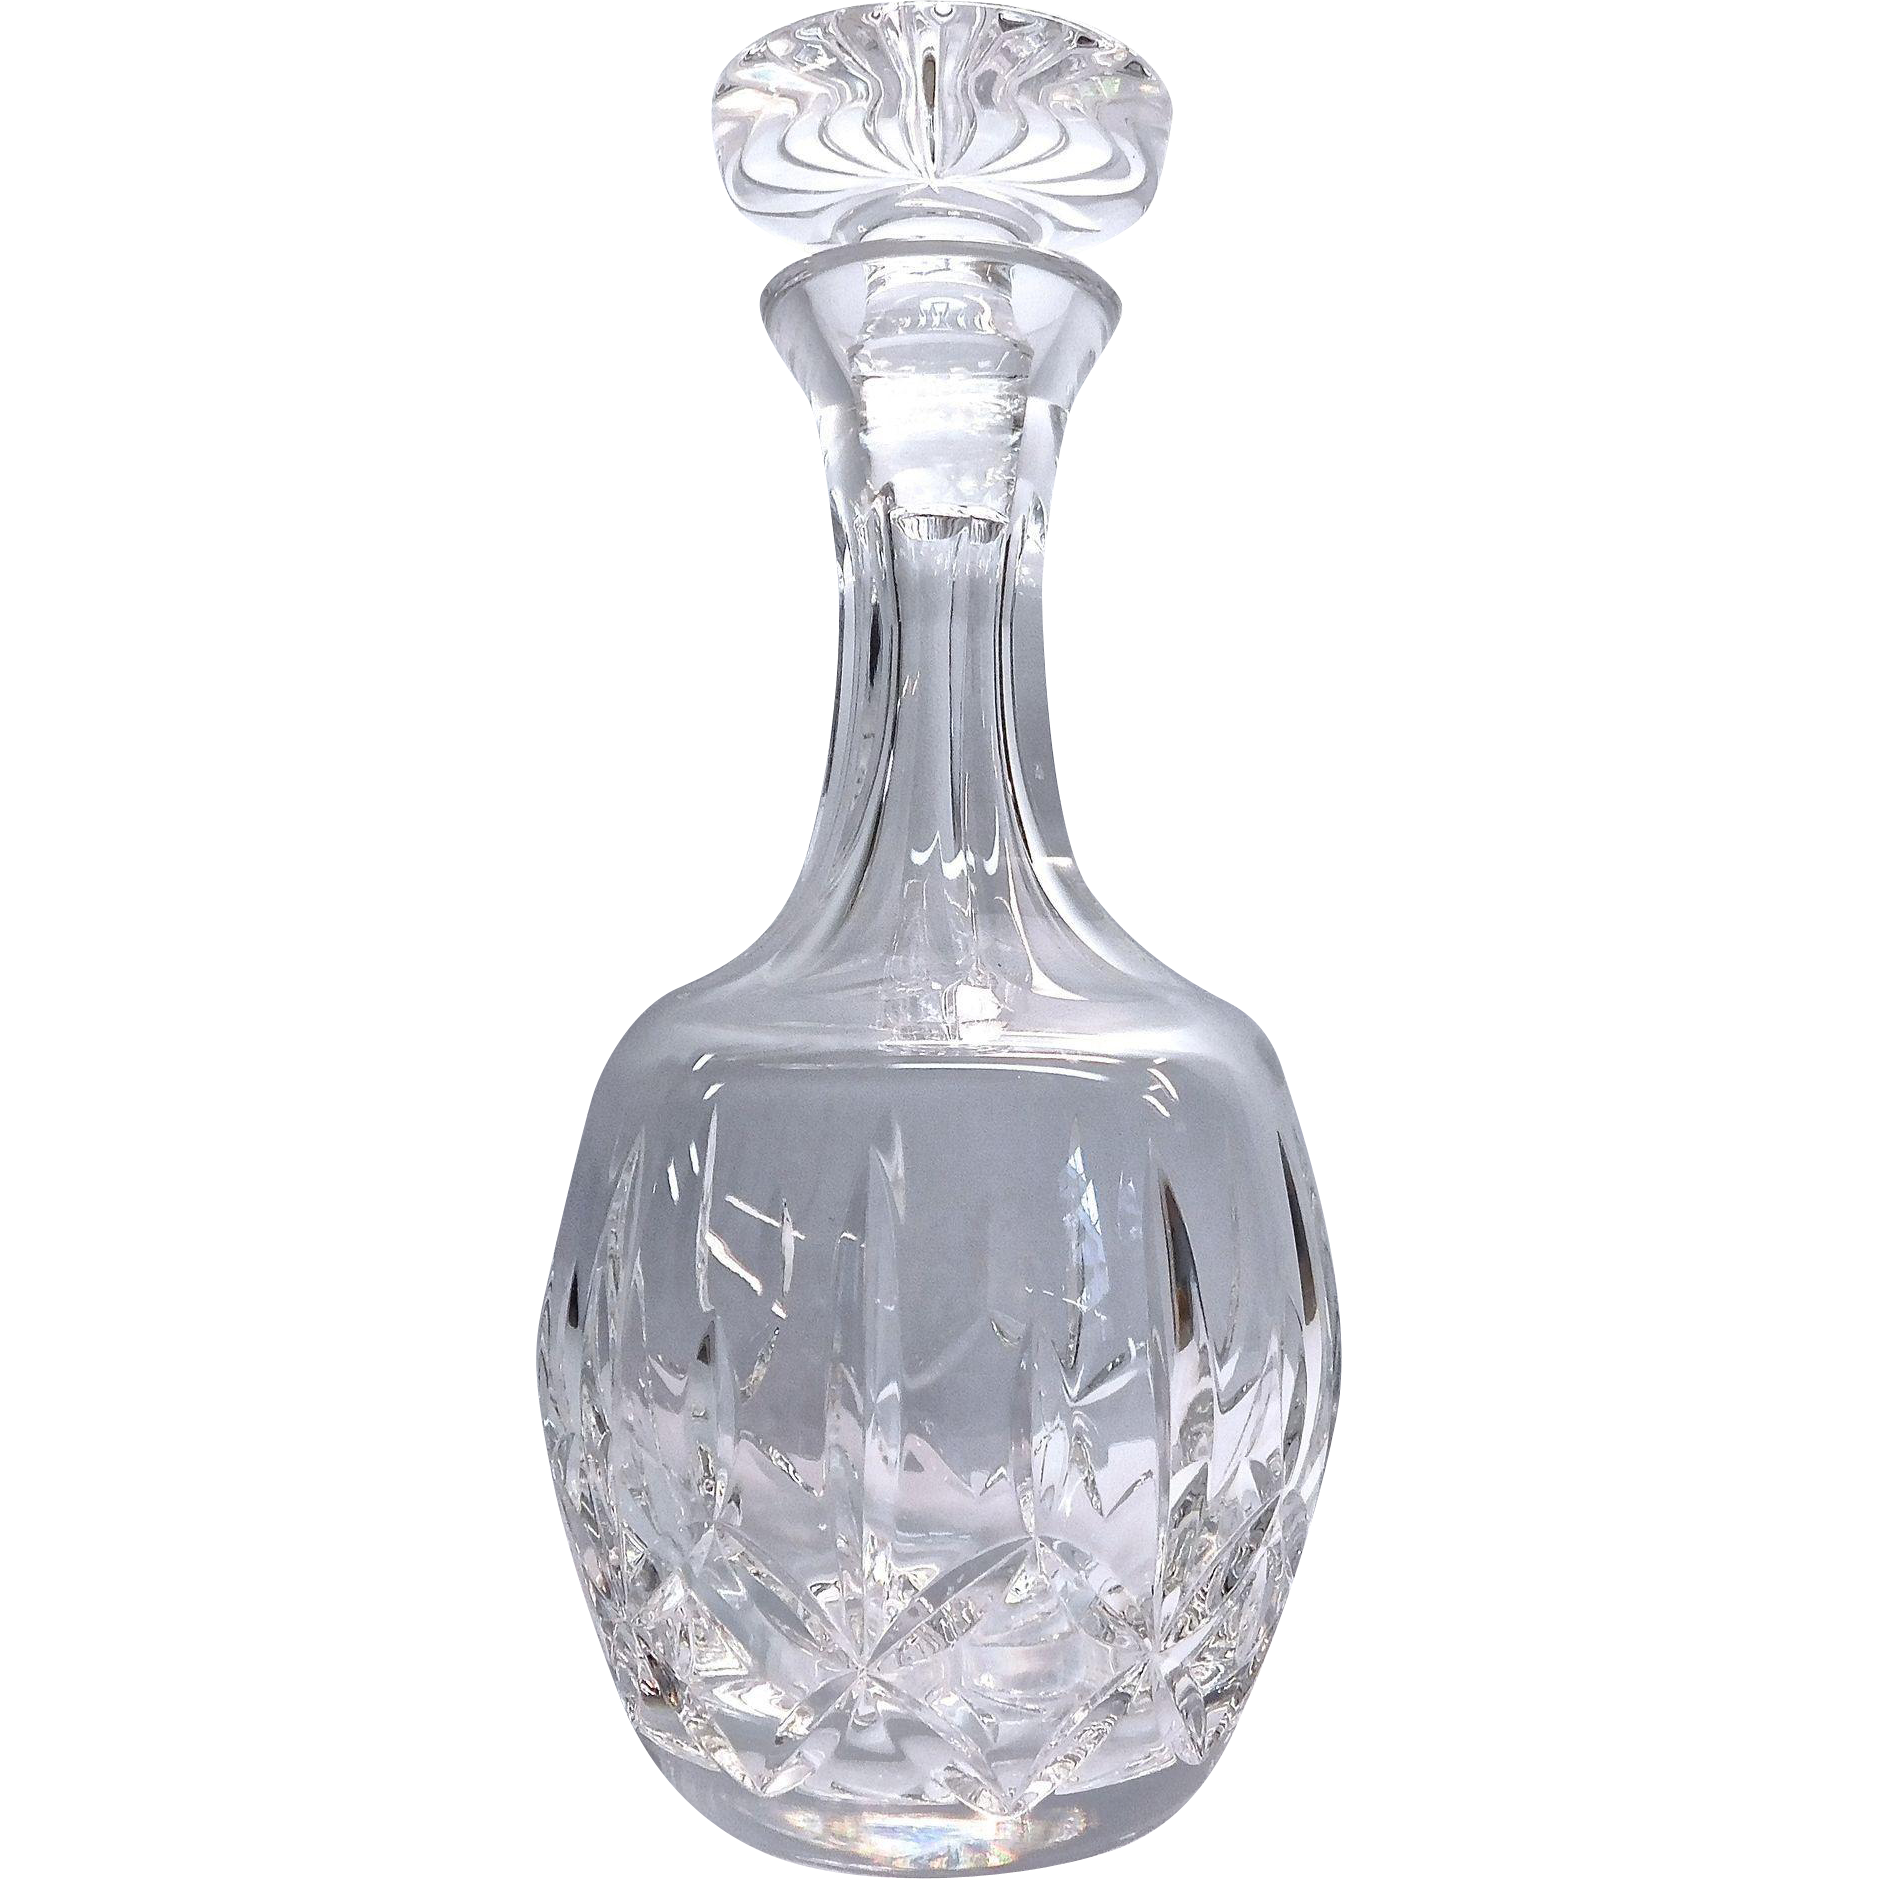 Lead Crystal Glass Decanter With Stopper By Atlantis : Artgate ...